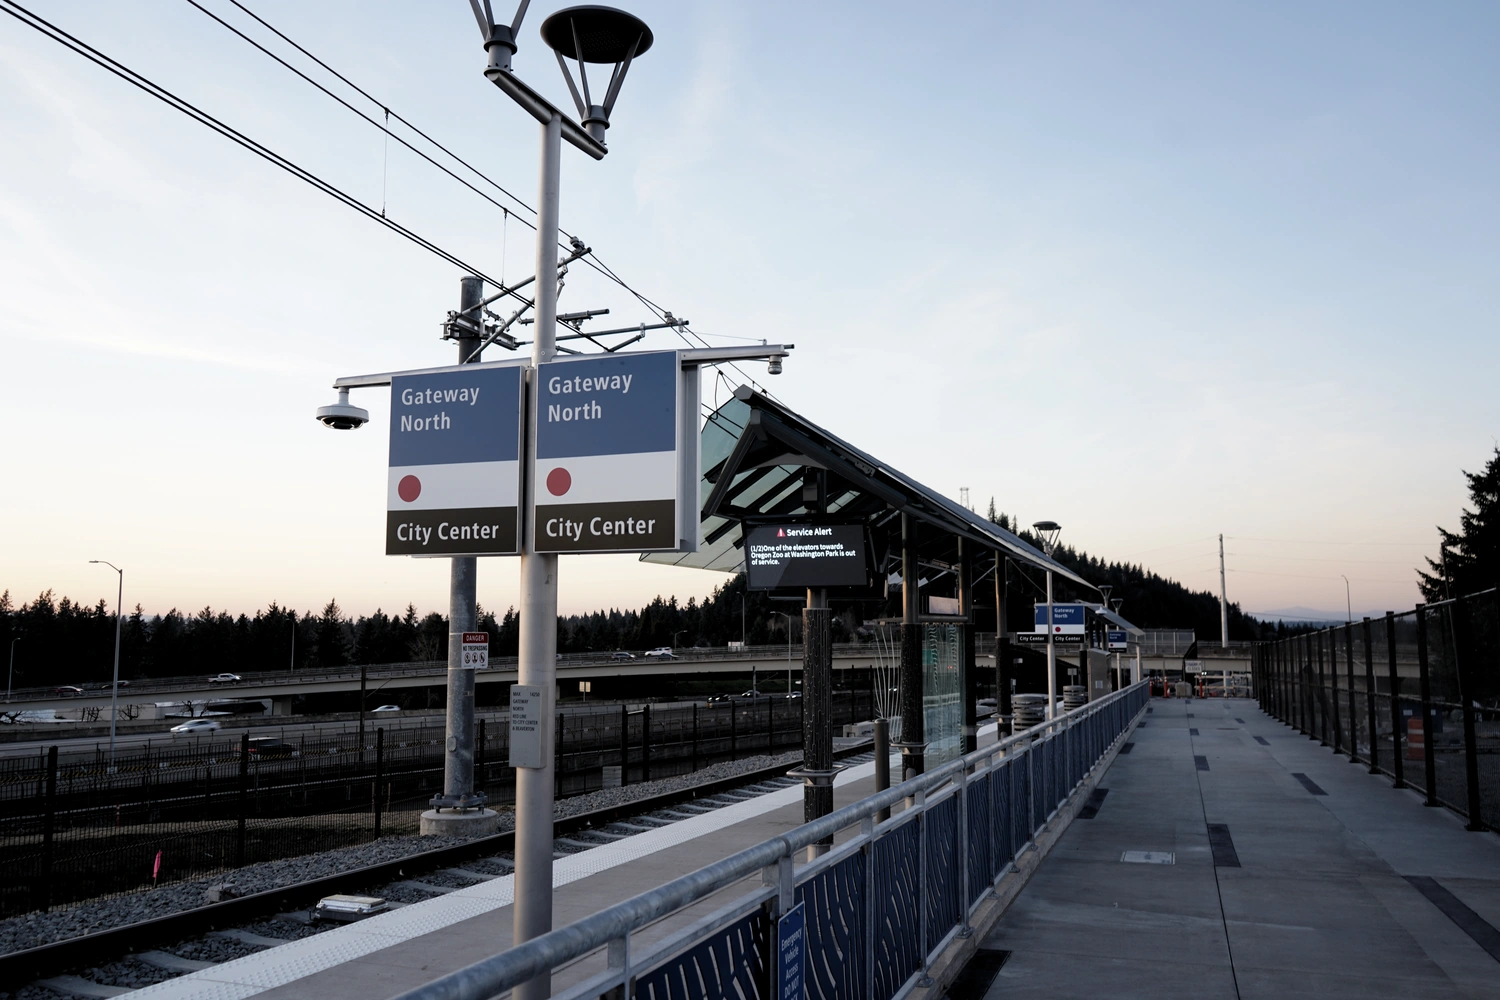 A railway platform shelter, platform, track, and catenary pole lie on
       the left;
       in the foreground is a sign that reads 'Gateway North' and 'City Center'
       with a red circle between them.